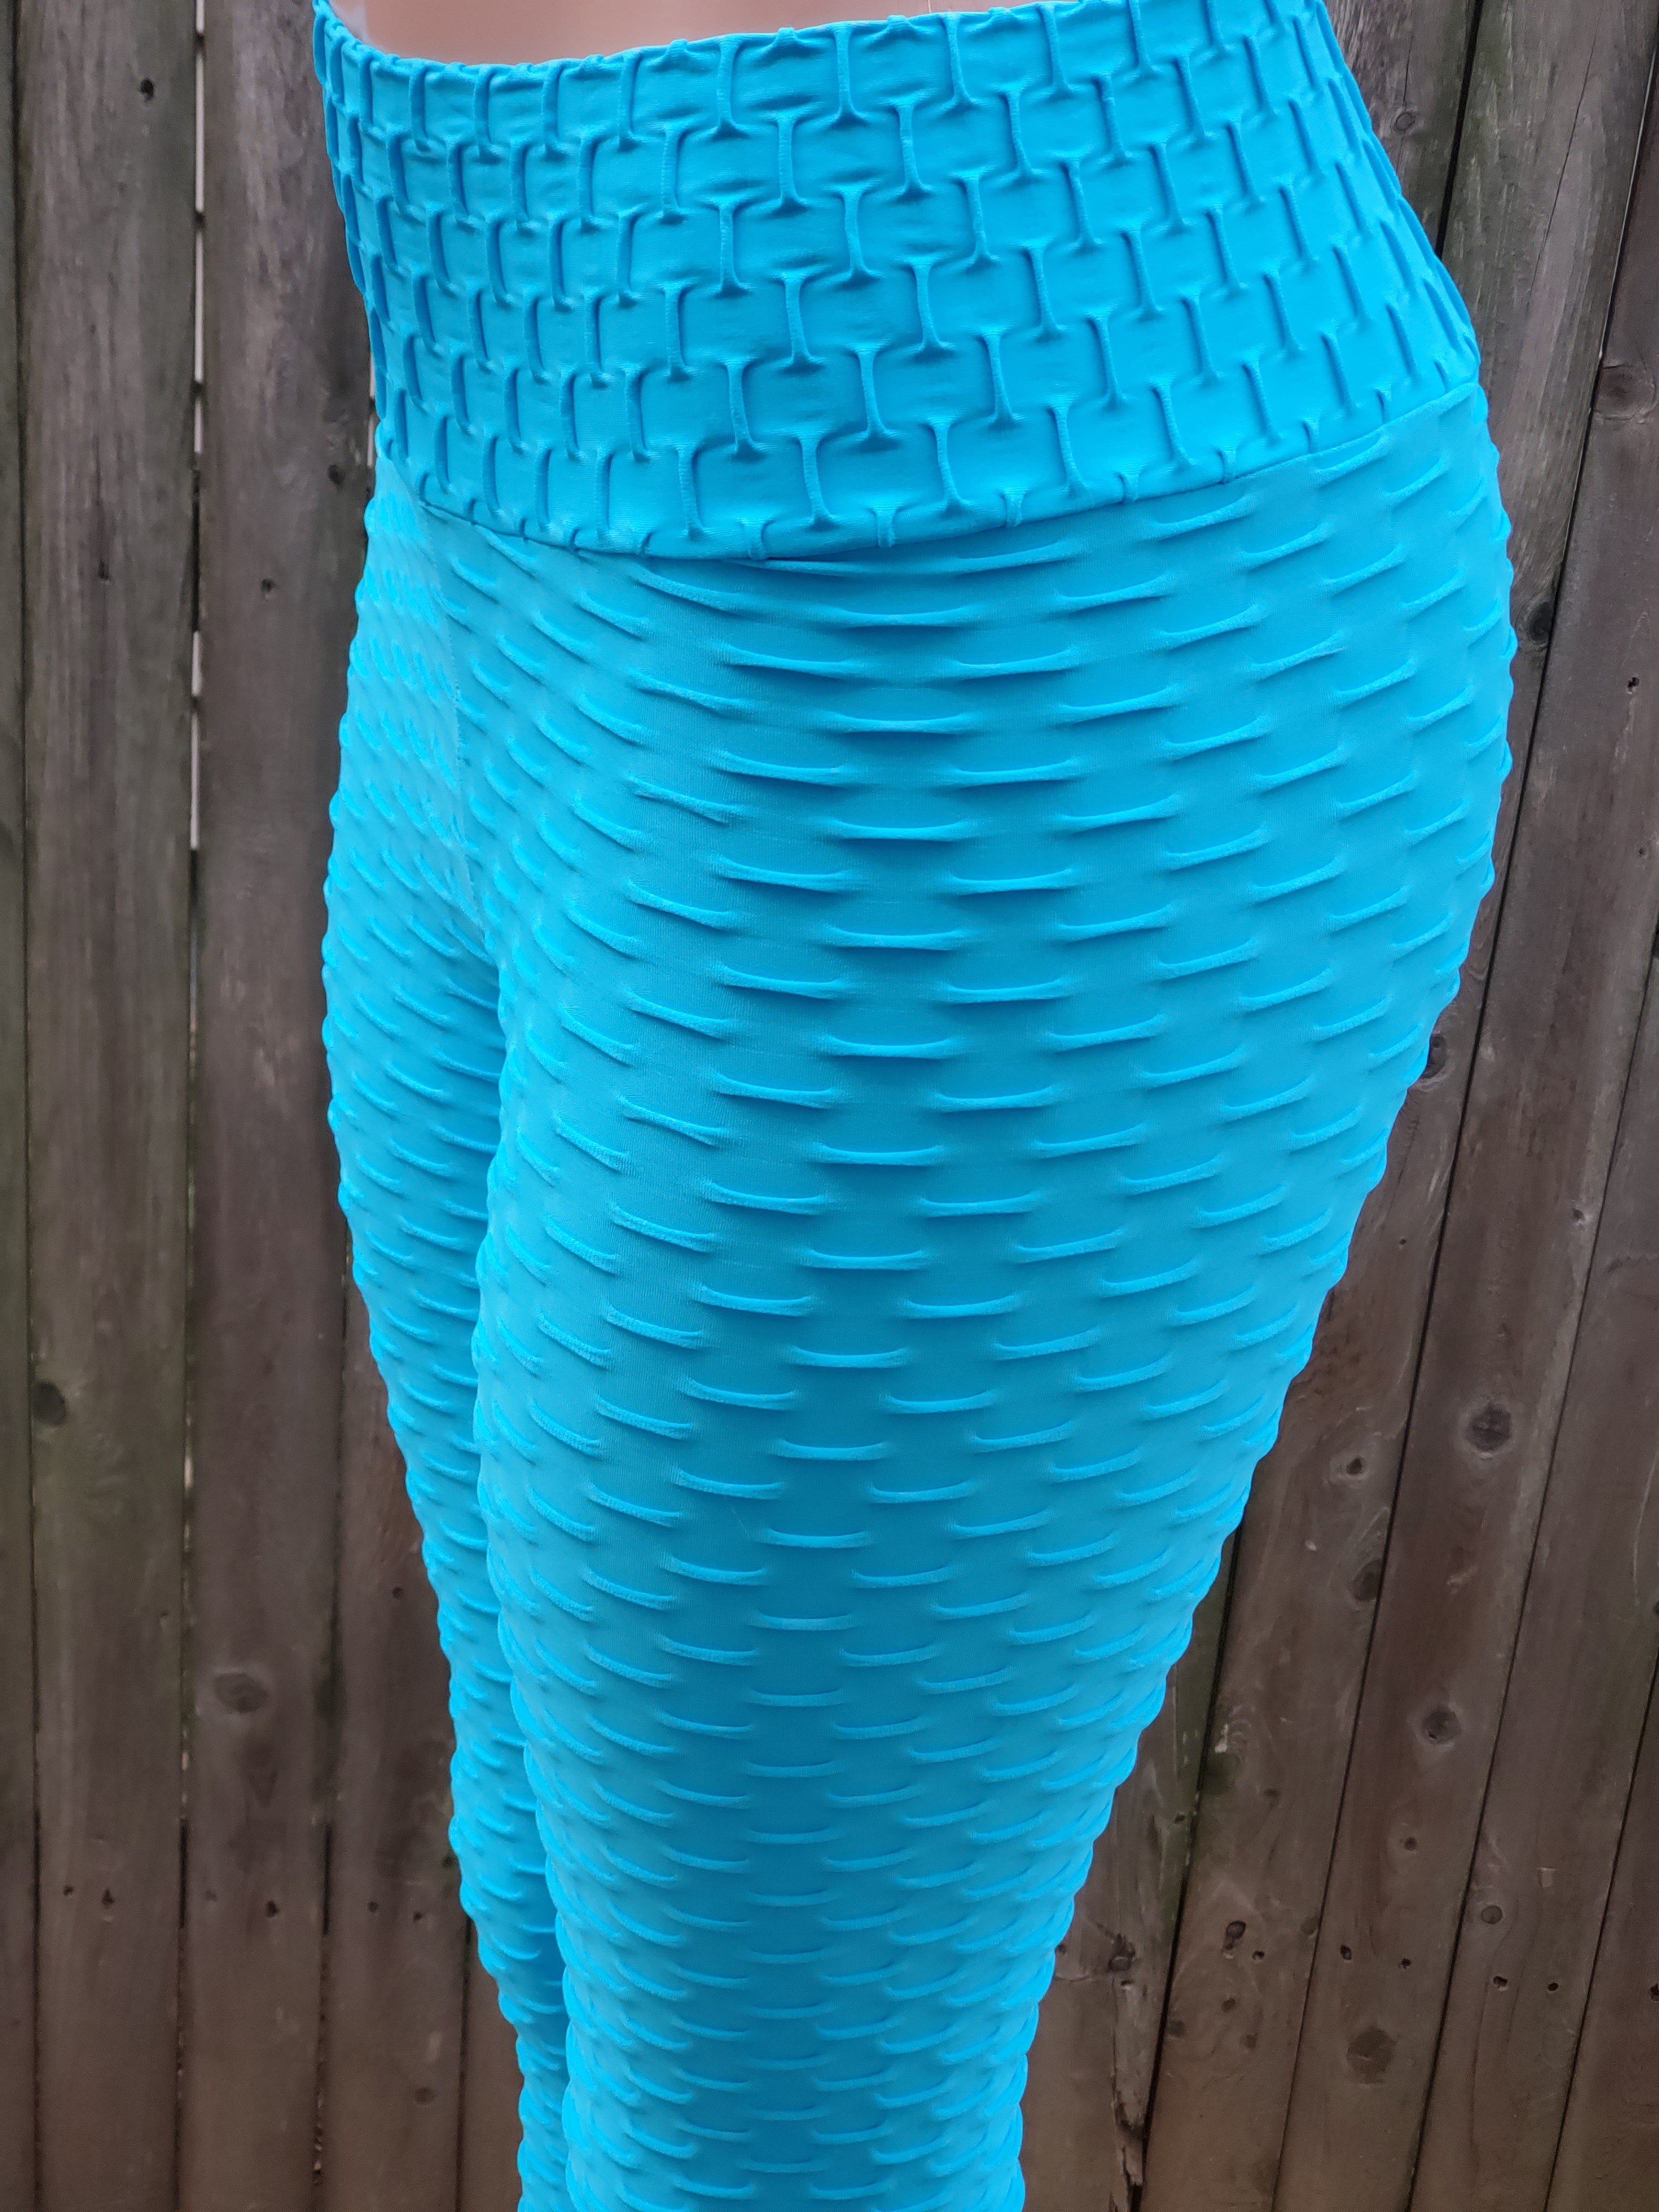 Ankle Fit Mixed Cotton with Spandex Stretchable Leggings Teal Green